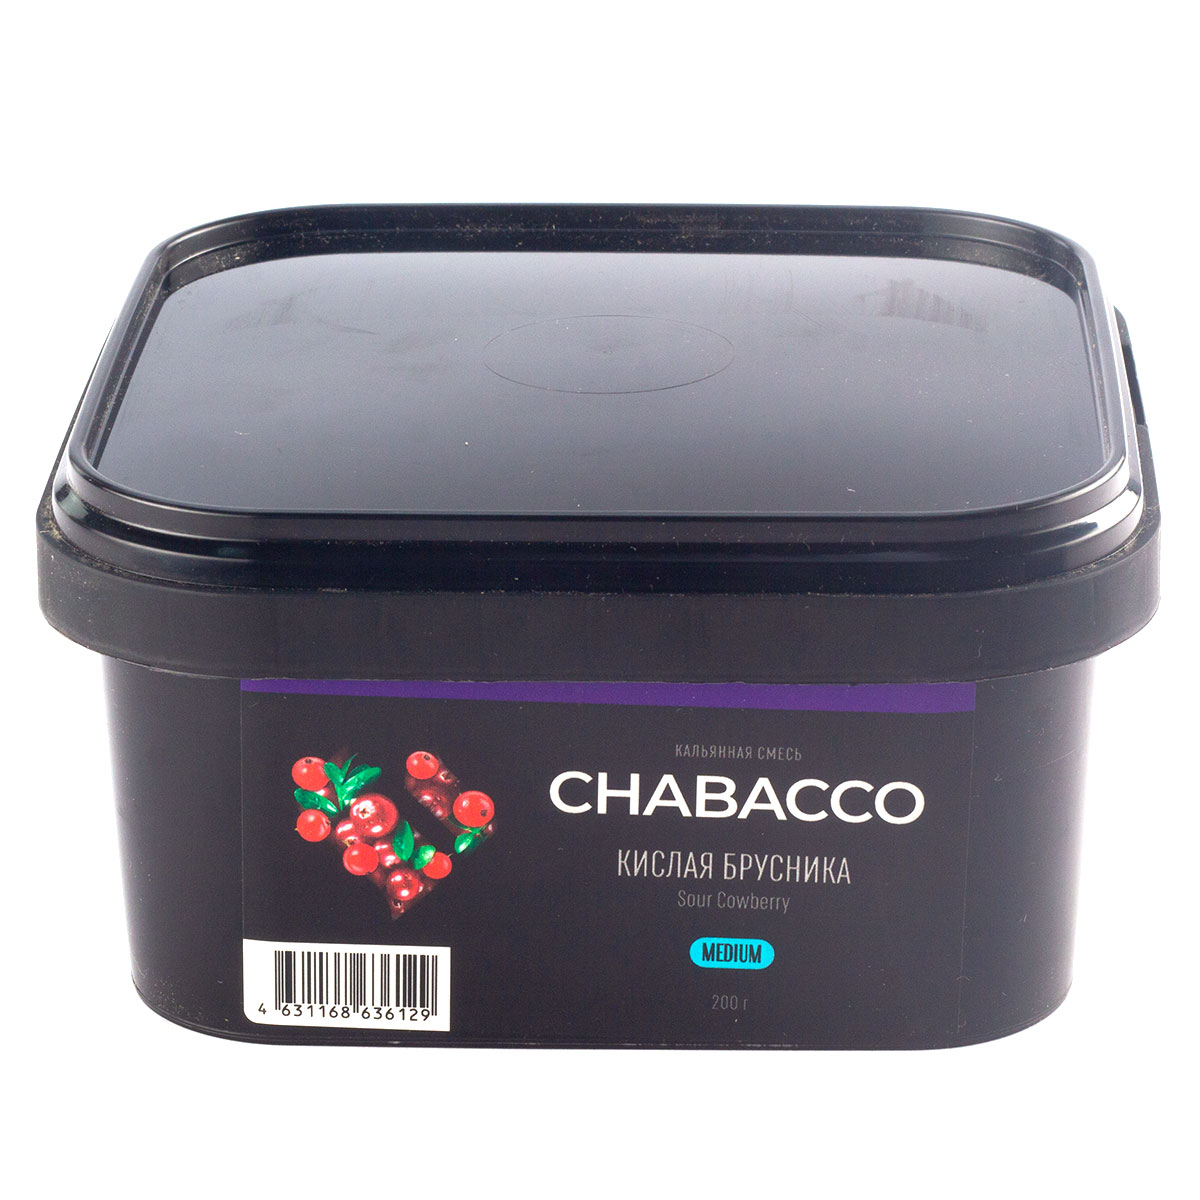 Chabacco - Medium - SOUR COWBERRY - 200 g